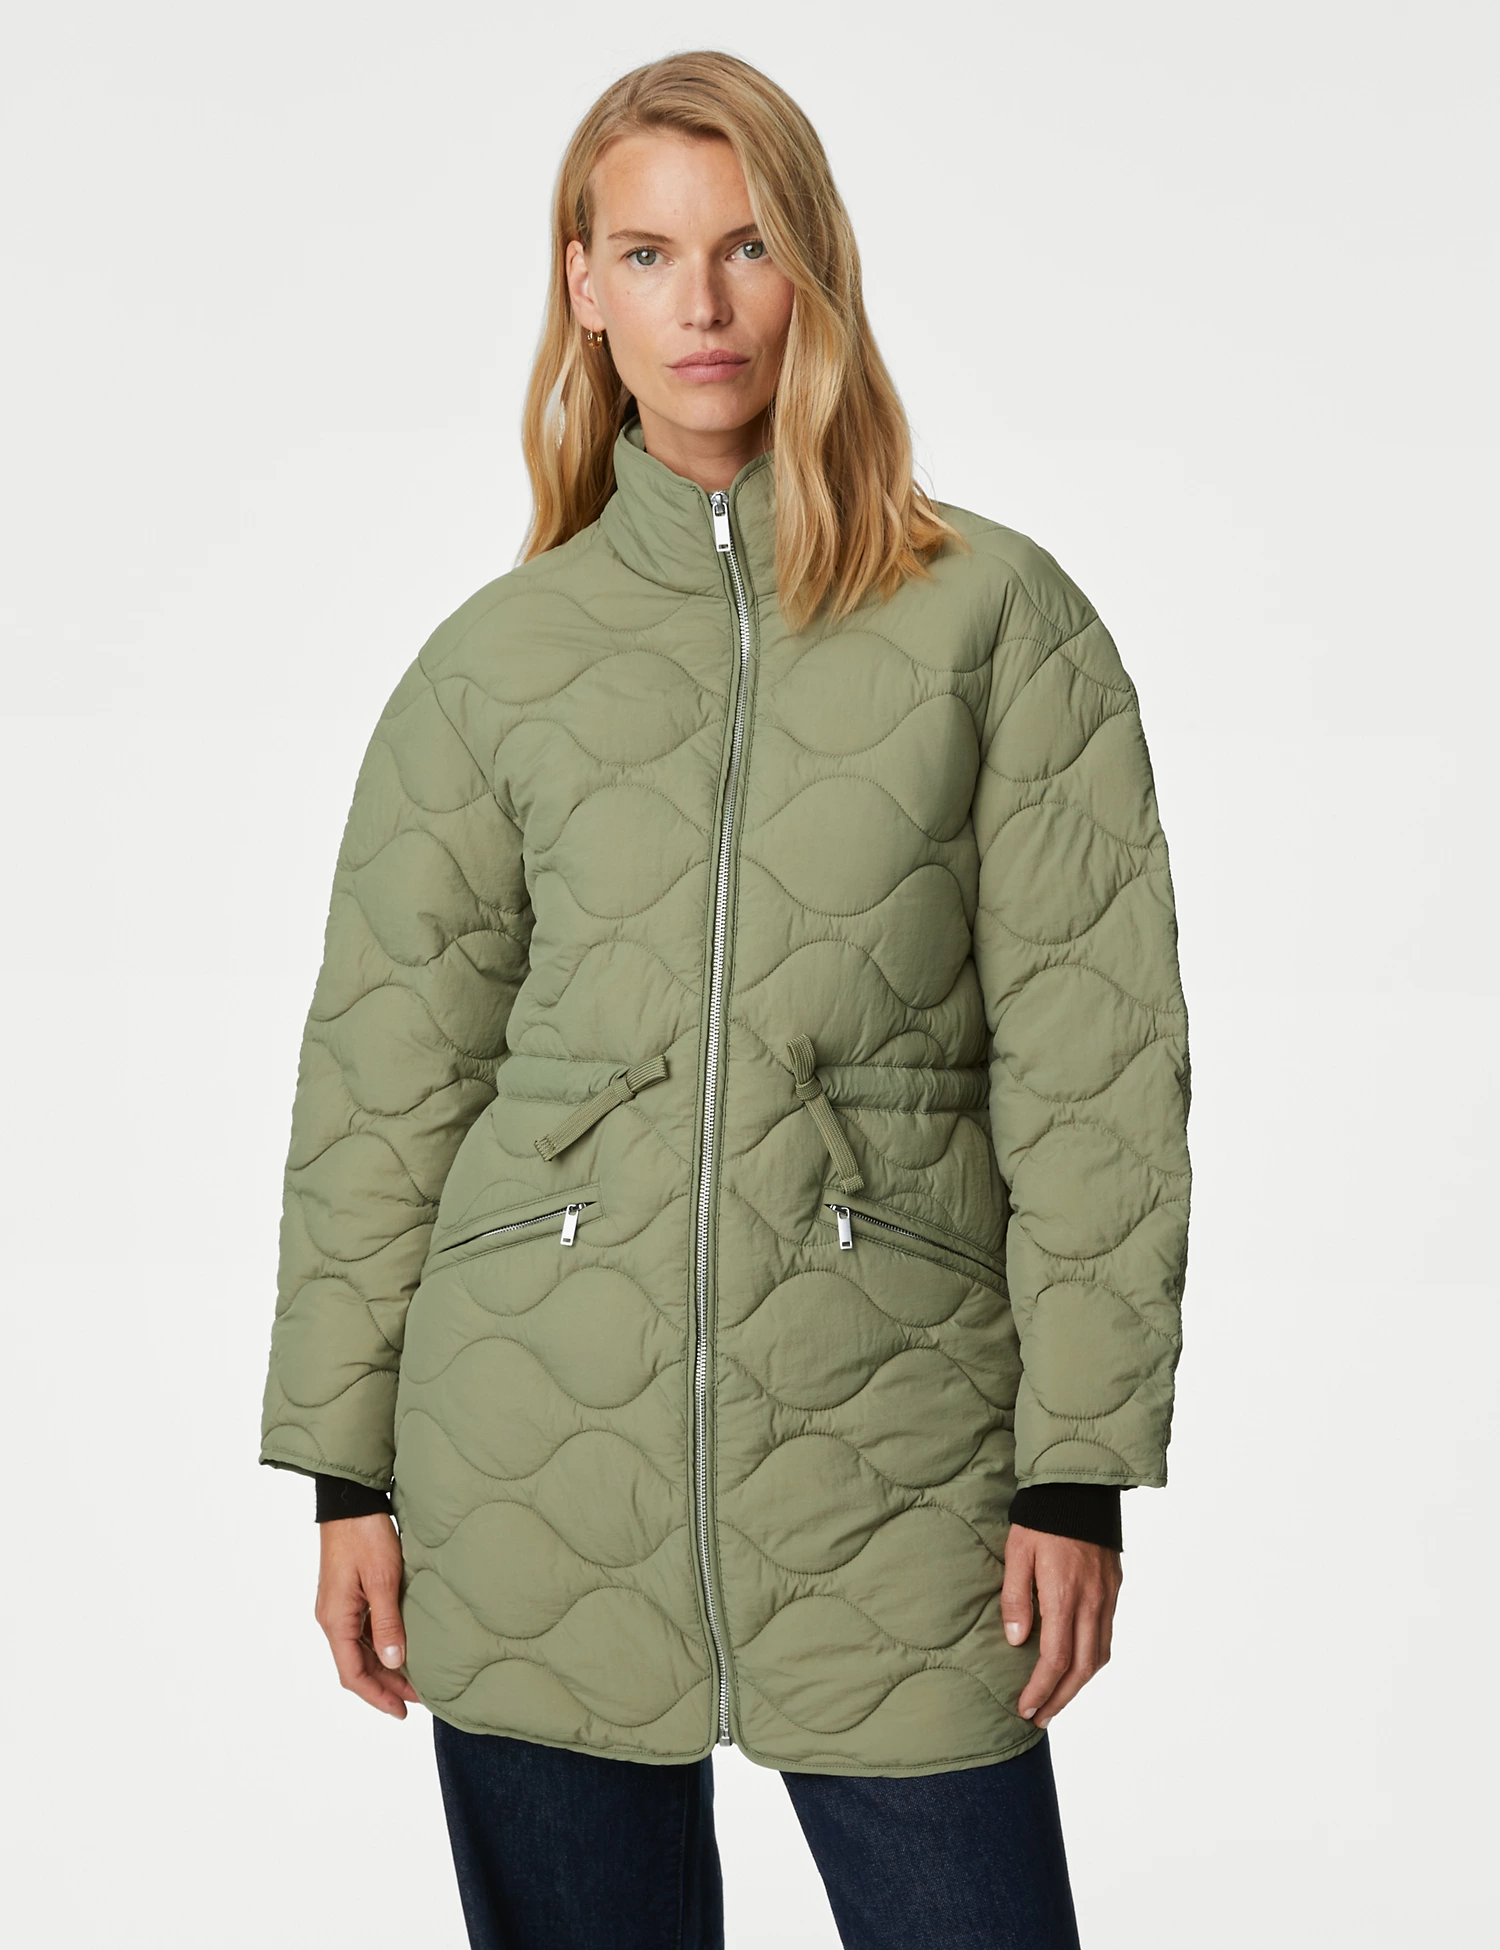 best quilted jackets 295353 1699890859237